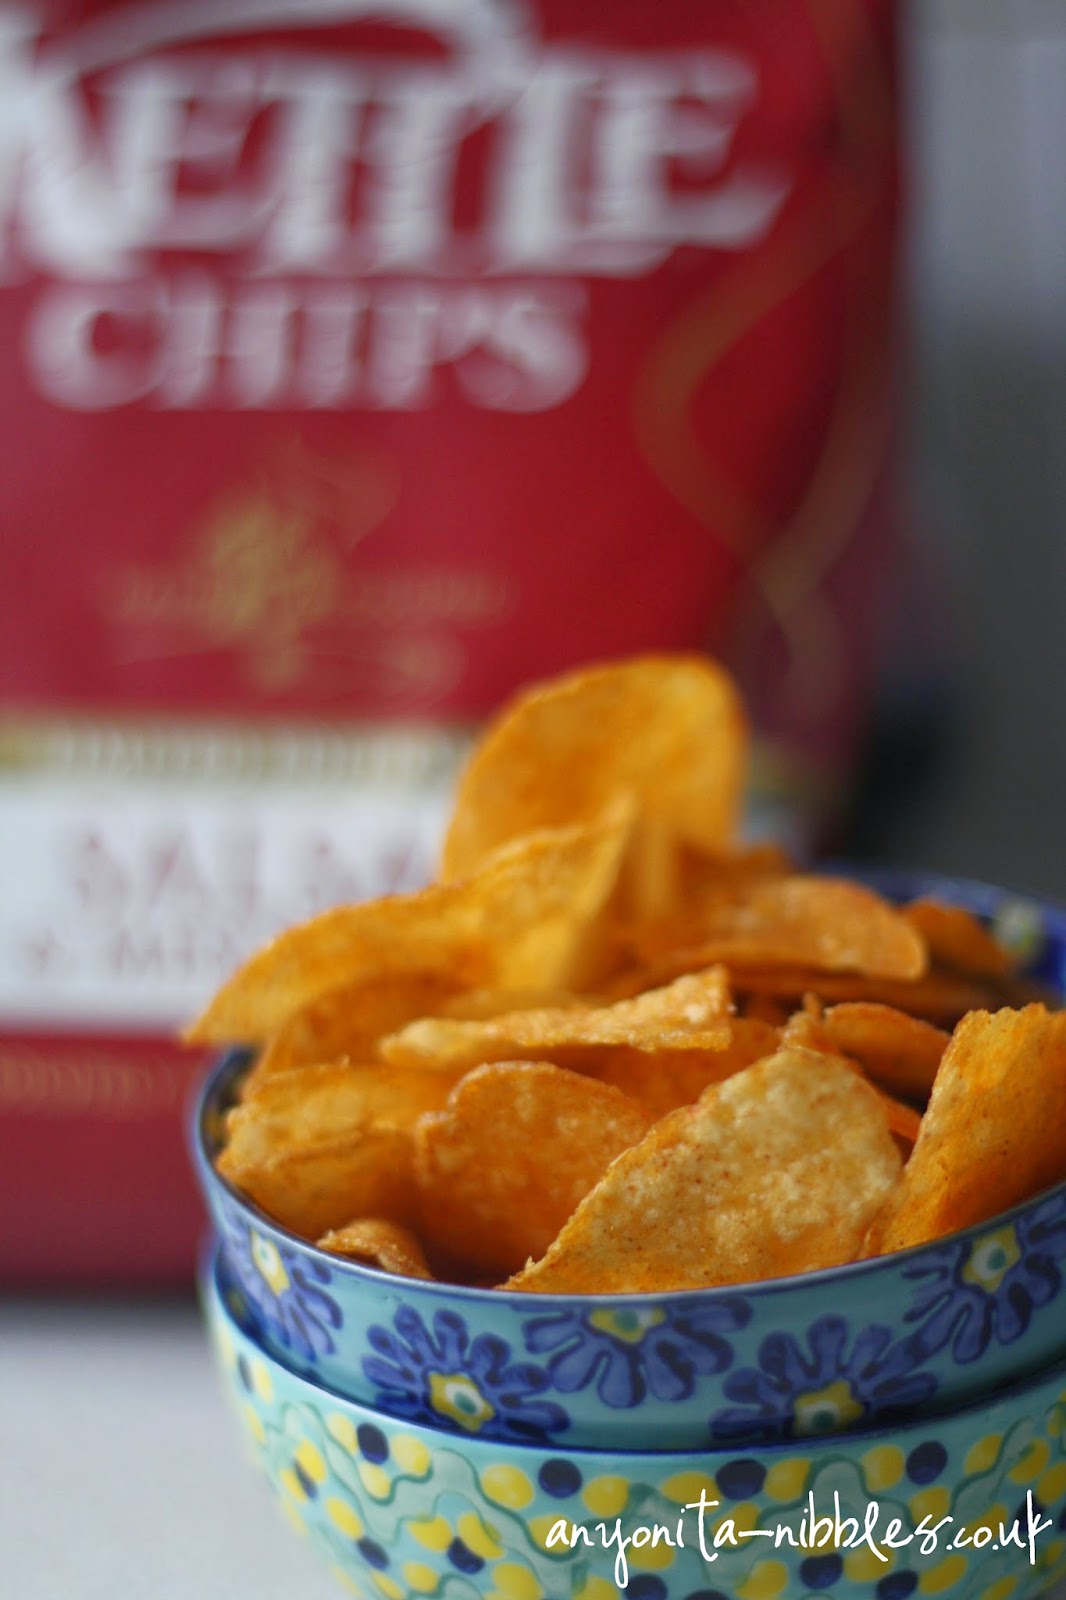 The strong paprika flavour of these Salsa & Mesquite Kettle Chips makes them ideal for Christmas parties from Anyonita-nibbles.co.uk